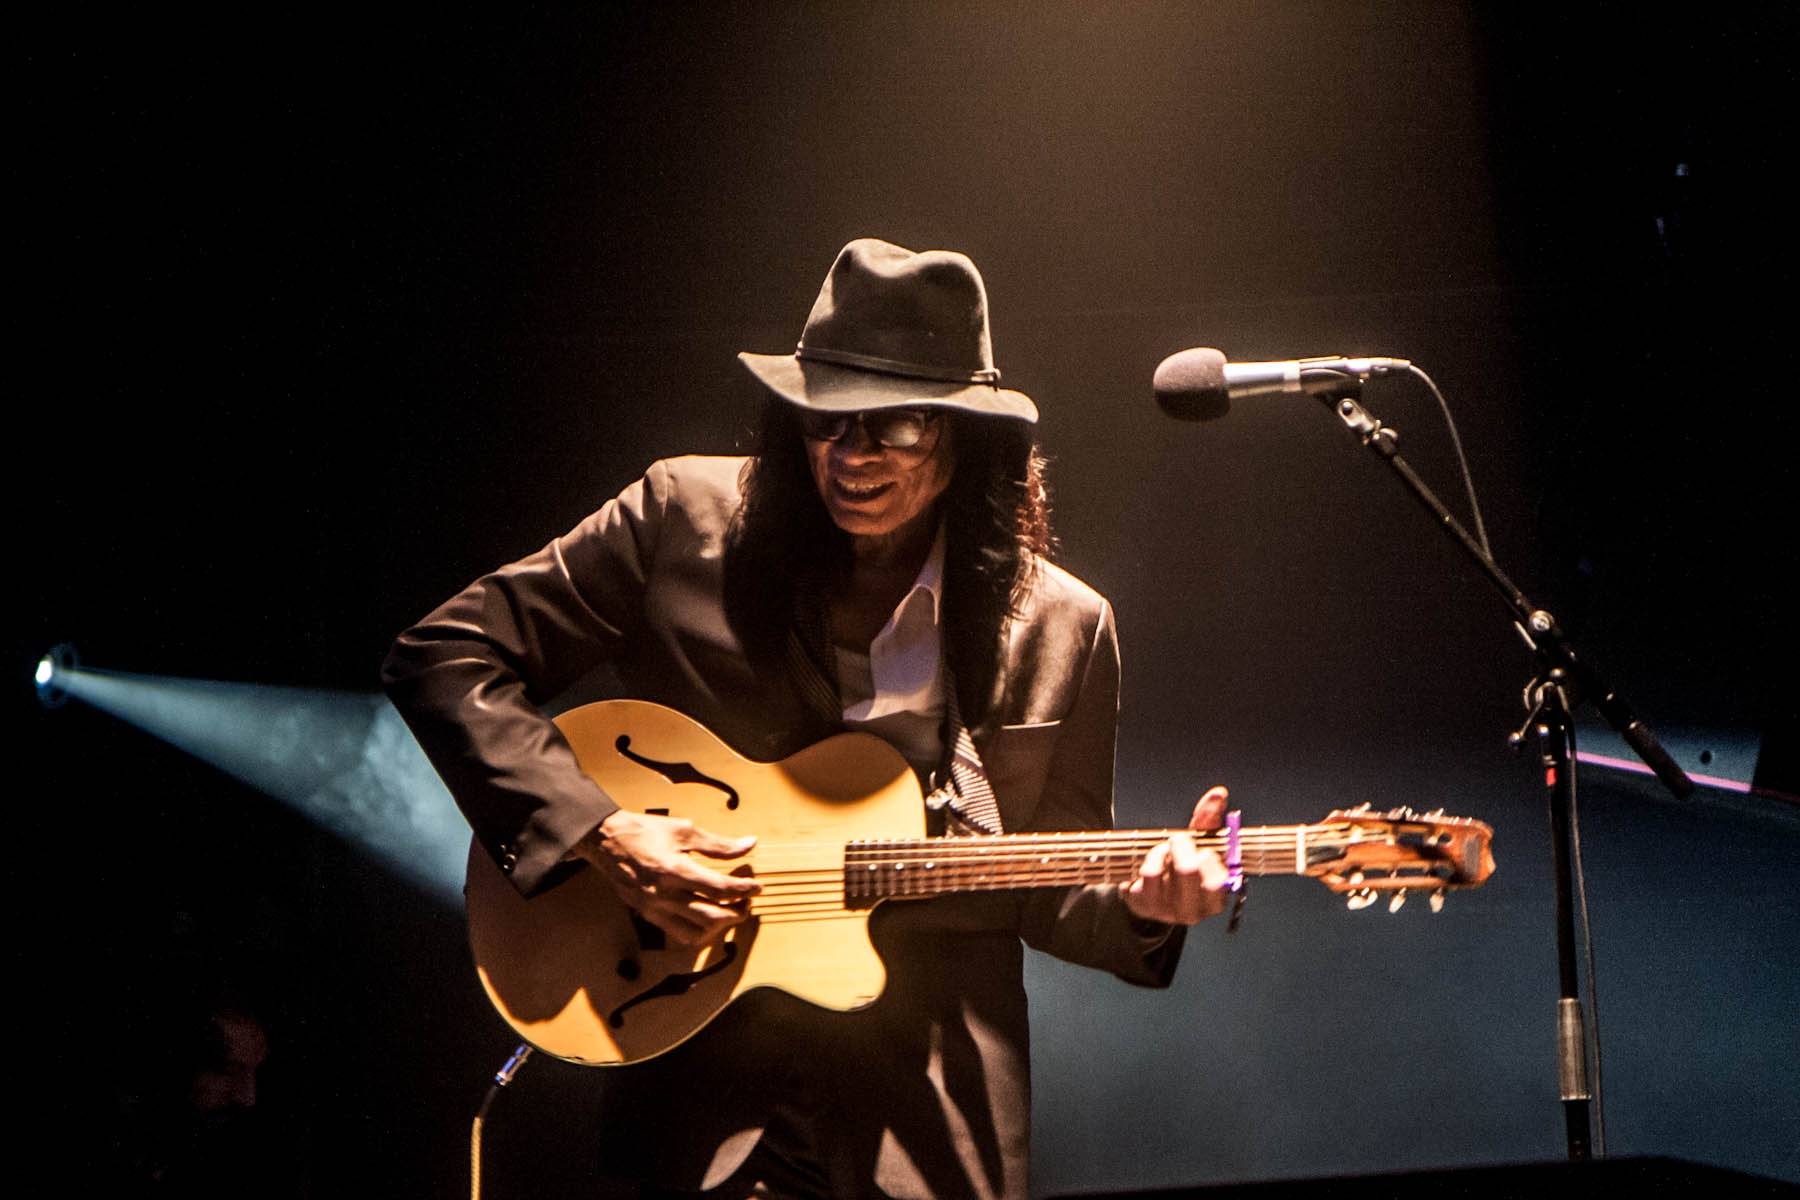 Rodriguez in Vancouver photo